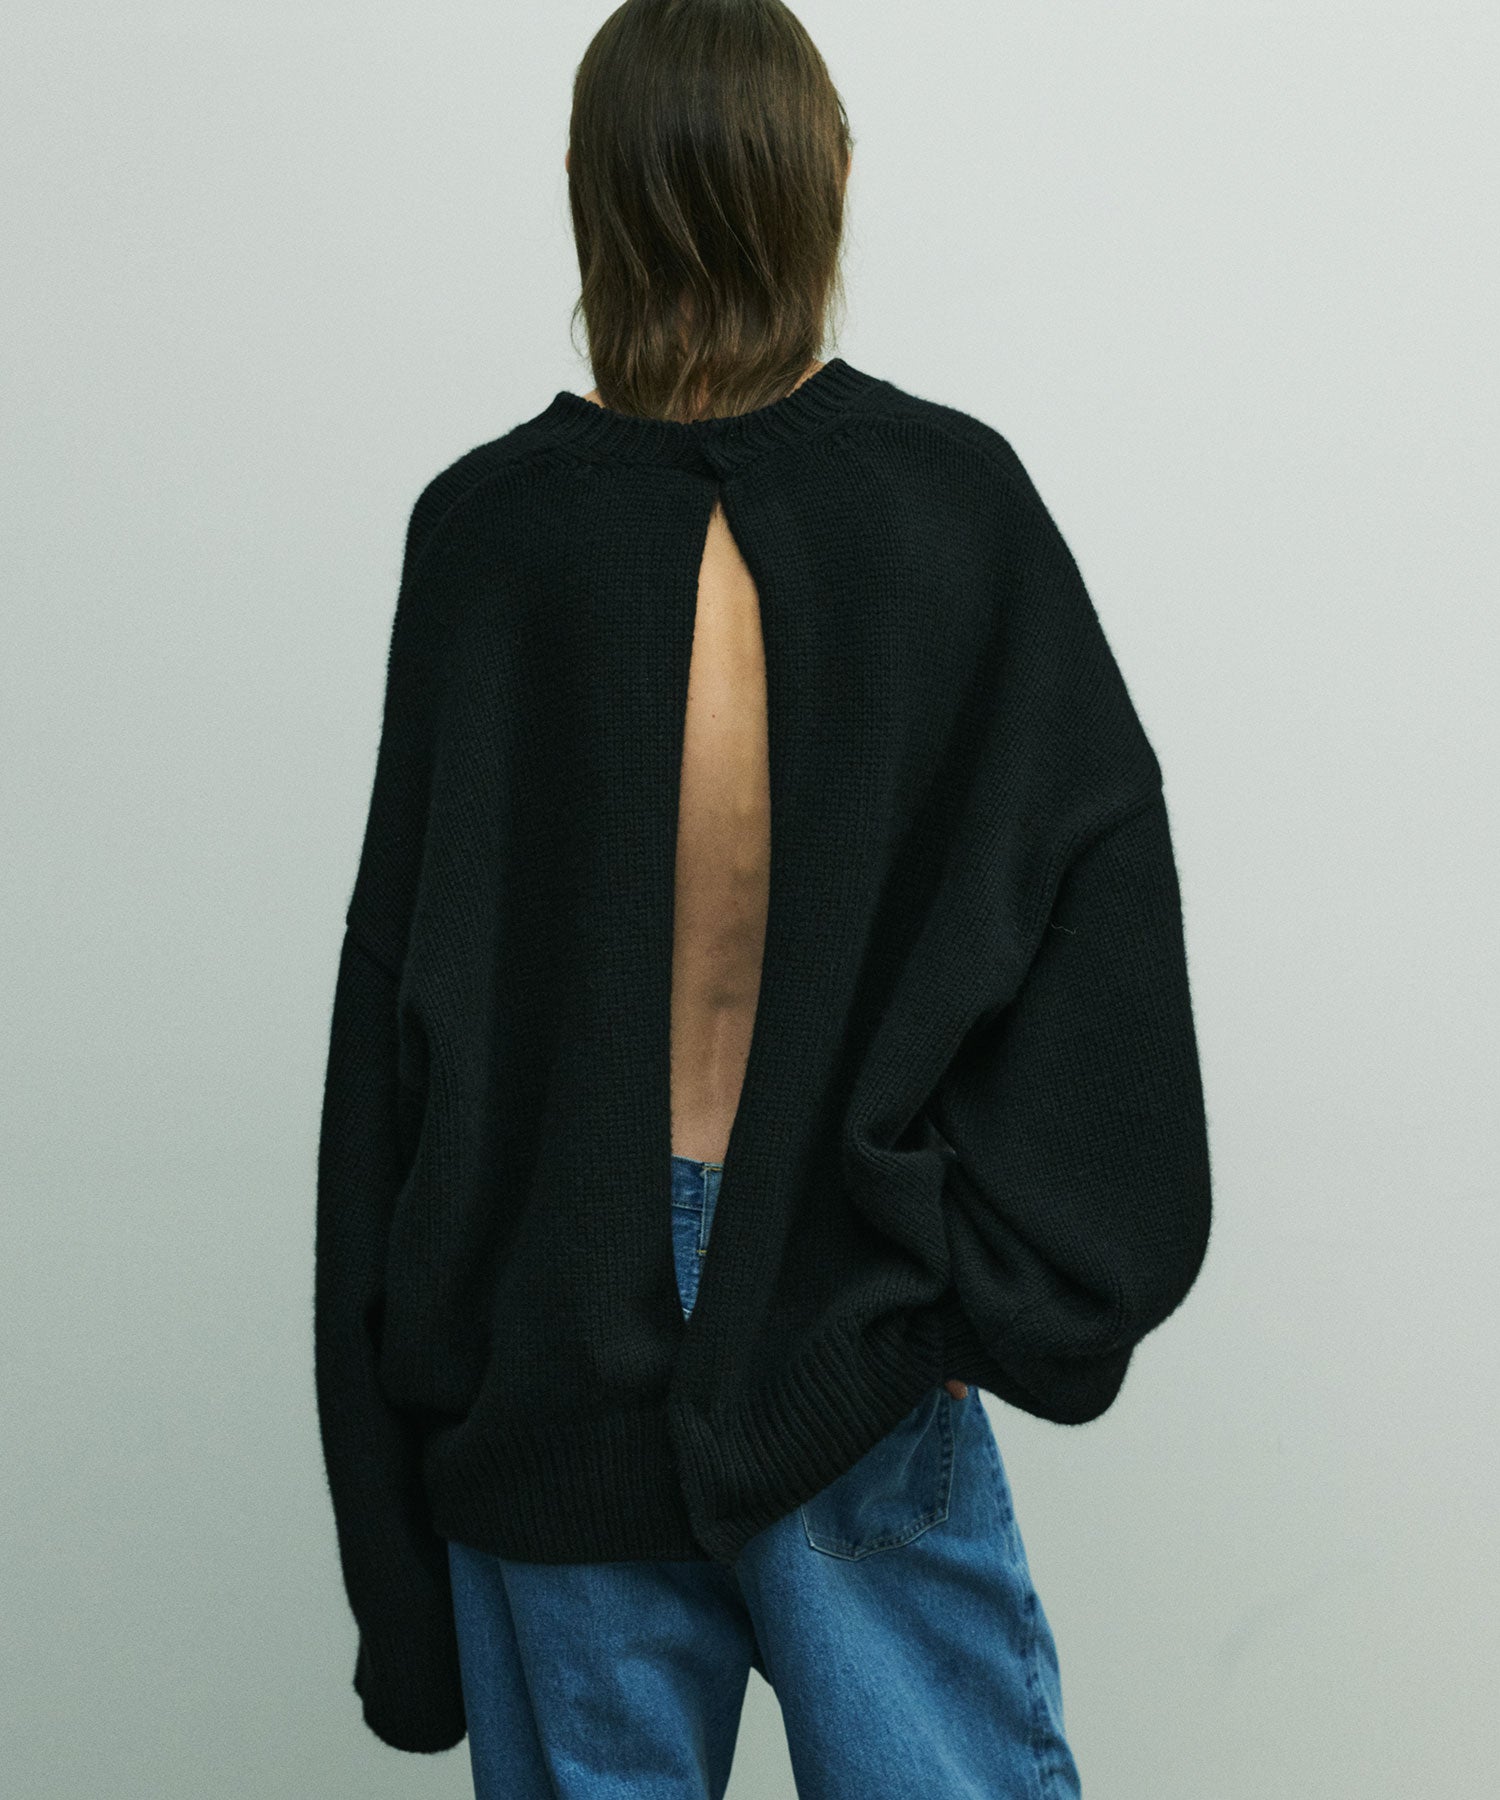 stein(シュタイン)の22AWコレクションのCASHMERE BACK BUTTONED KNIT JUMPERのBLACK